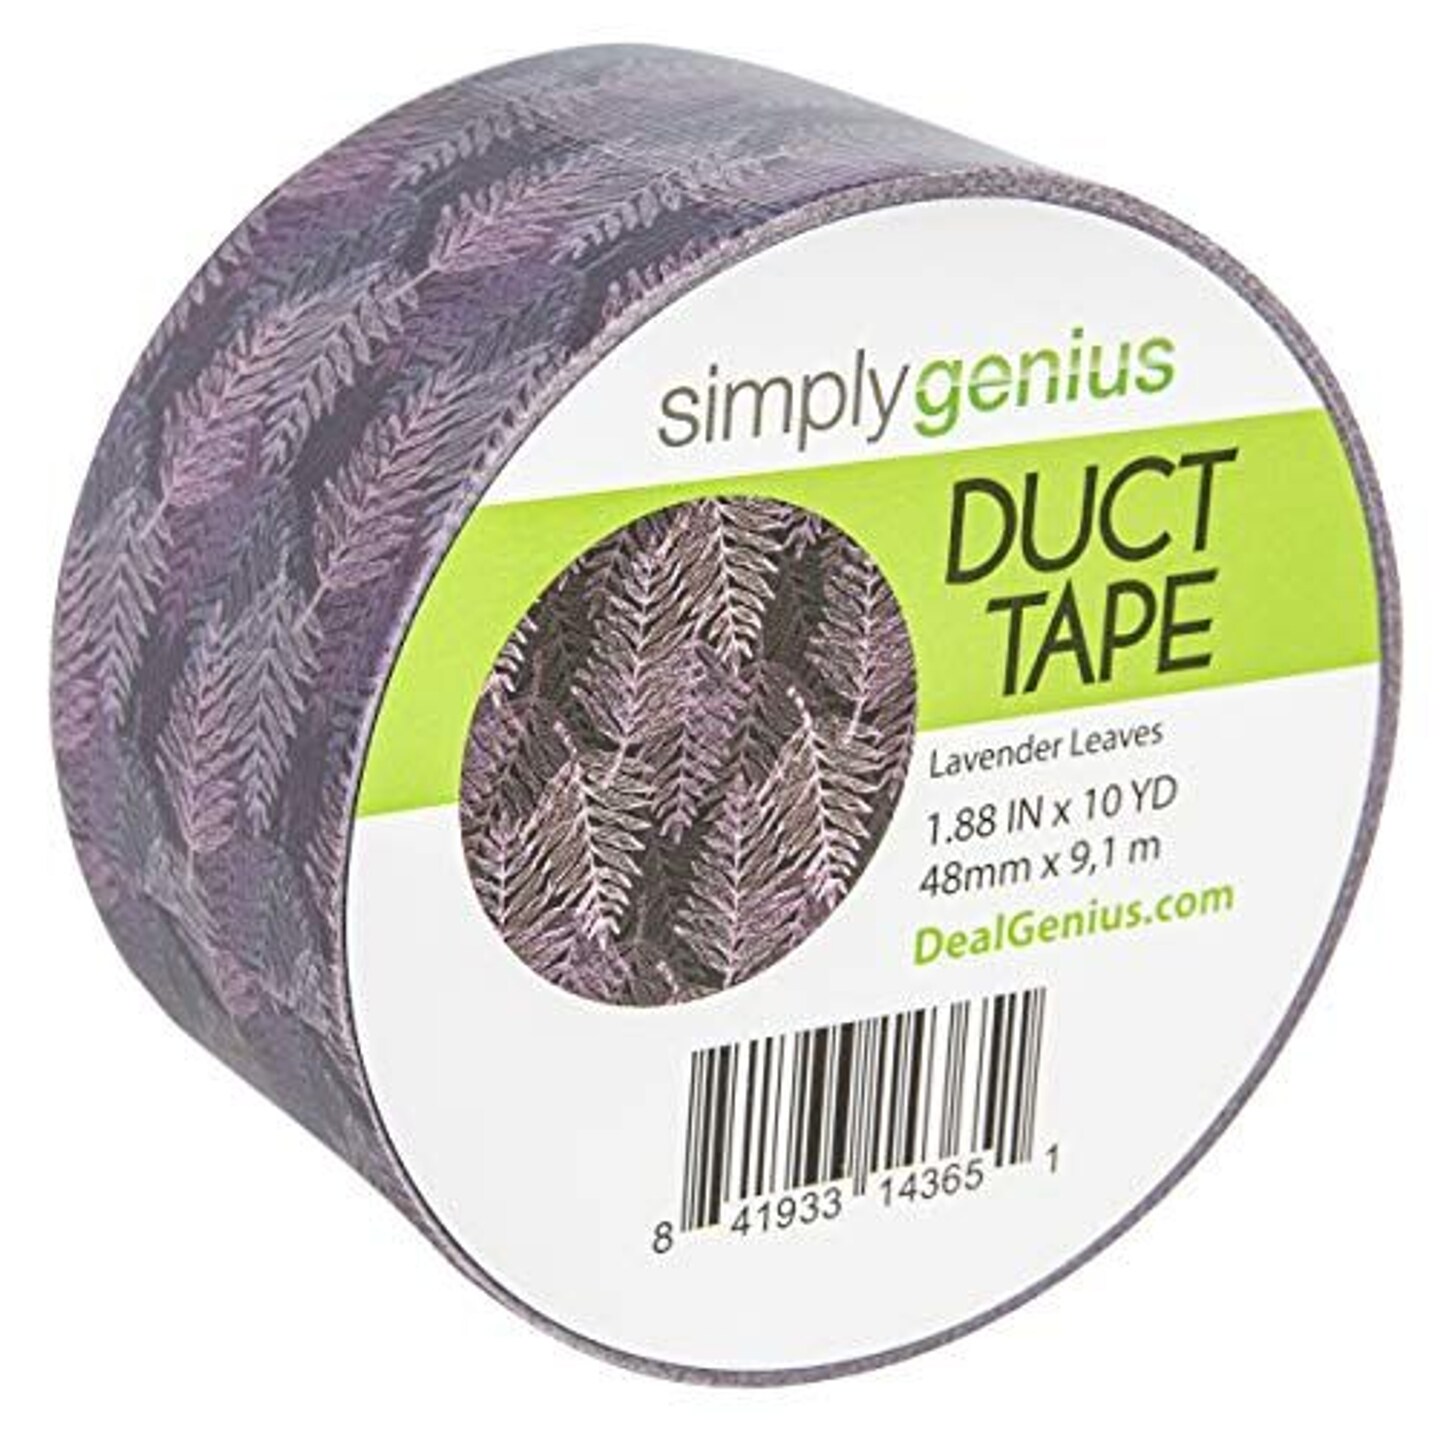 Simply Genius Pattern Duct Tape Heavy Duty - Craft Supplies for Kids &#x26; Adults - Colored Duct Tape - Single Roll 1.8 in x 10 yards - Colorful Tape for DIY, Craft &#x26; Home Improvement (Lavender Leaves)